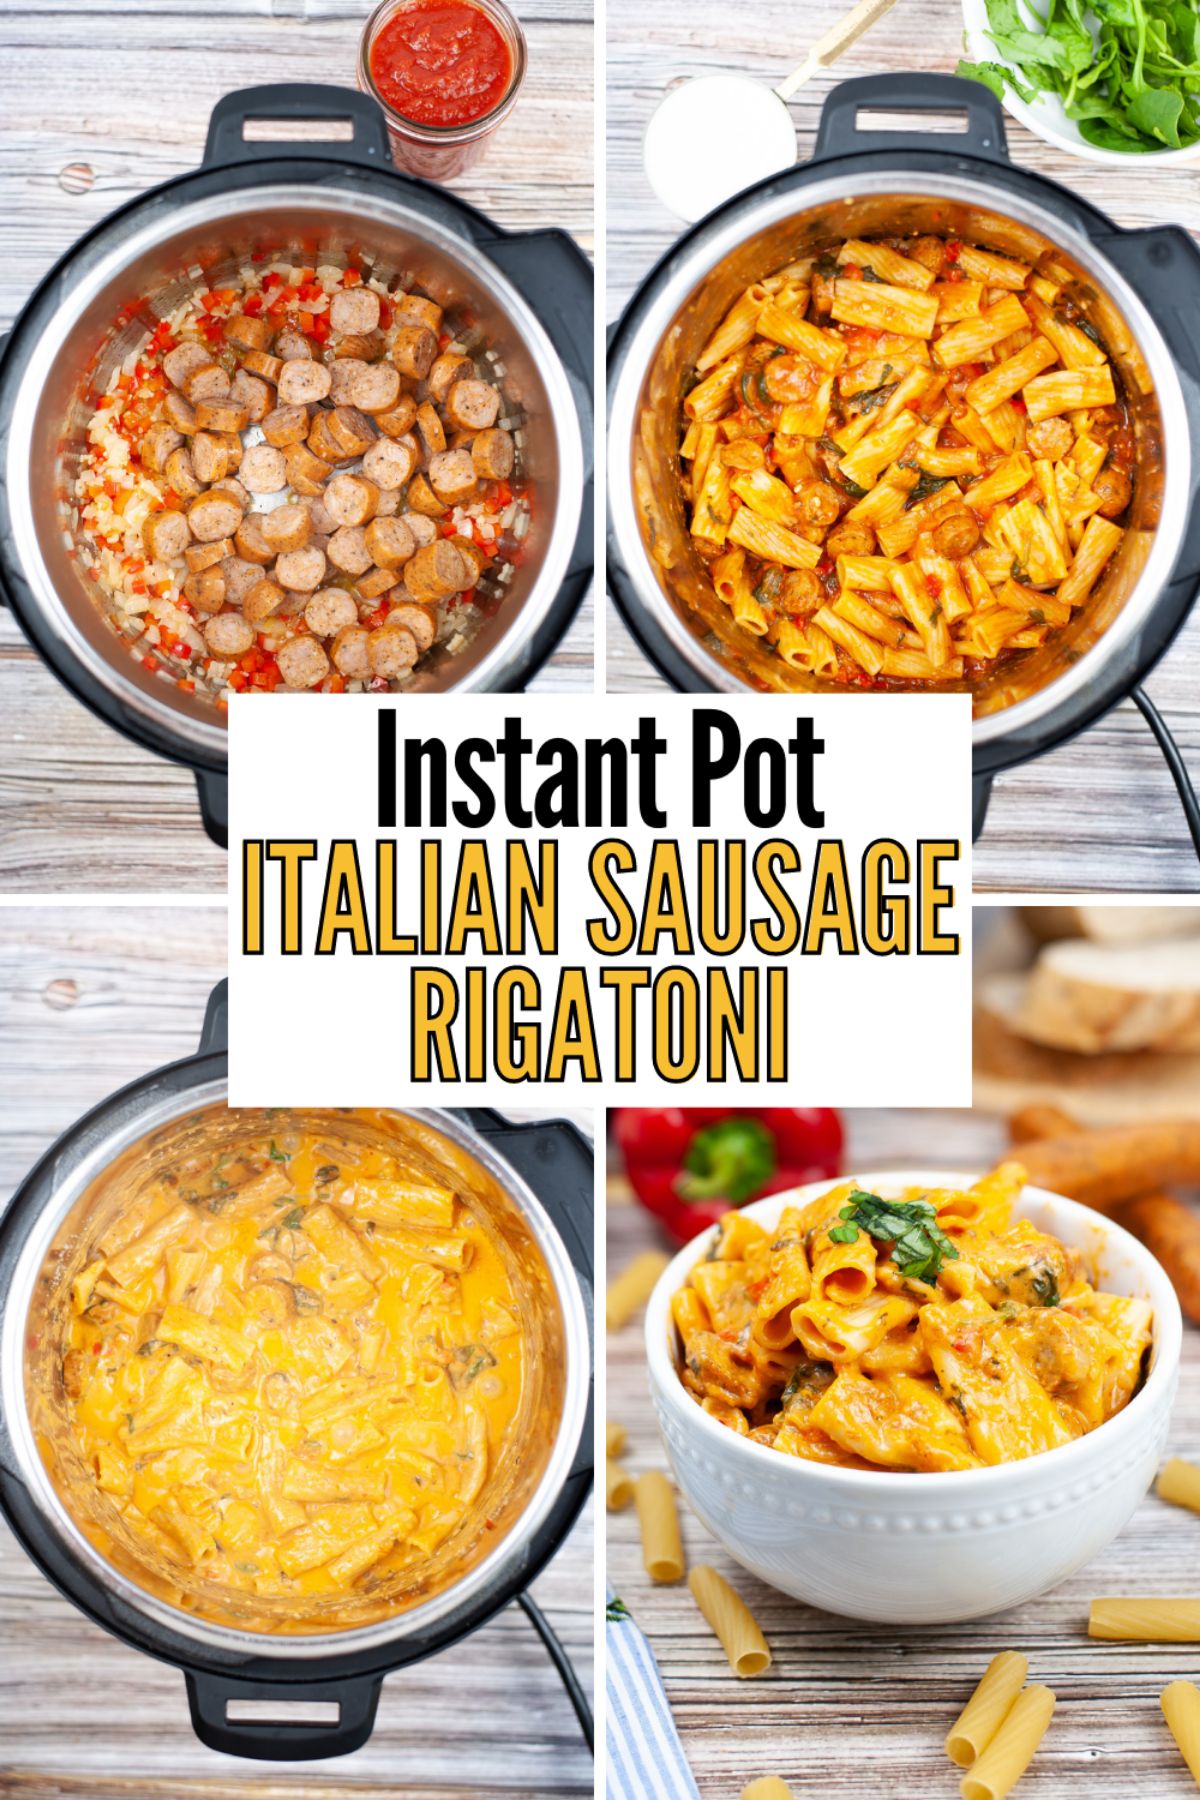 Instant Pot Italian Sausage Rigatoni is an easy, flavorful meal for any night of the week. Even the pickiest eaters are going to love it. #instantpot #pressurecooker #instantpotrigatoni #rigatoni #italiansausage via @wondermomwannab